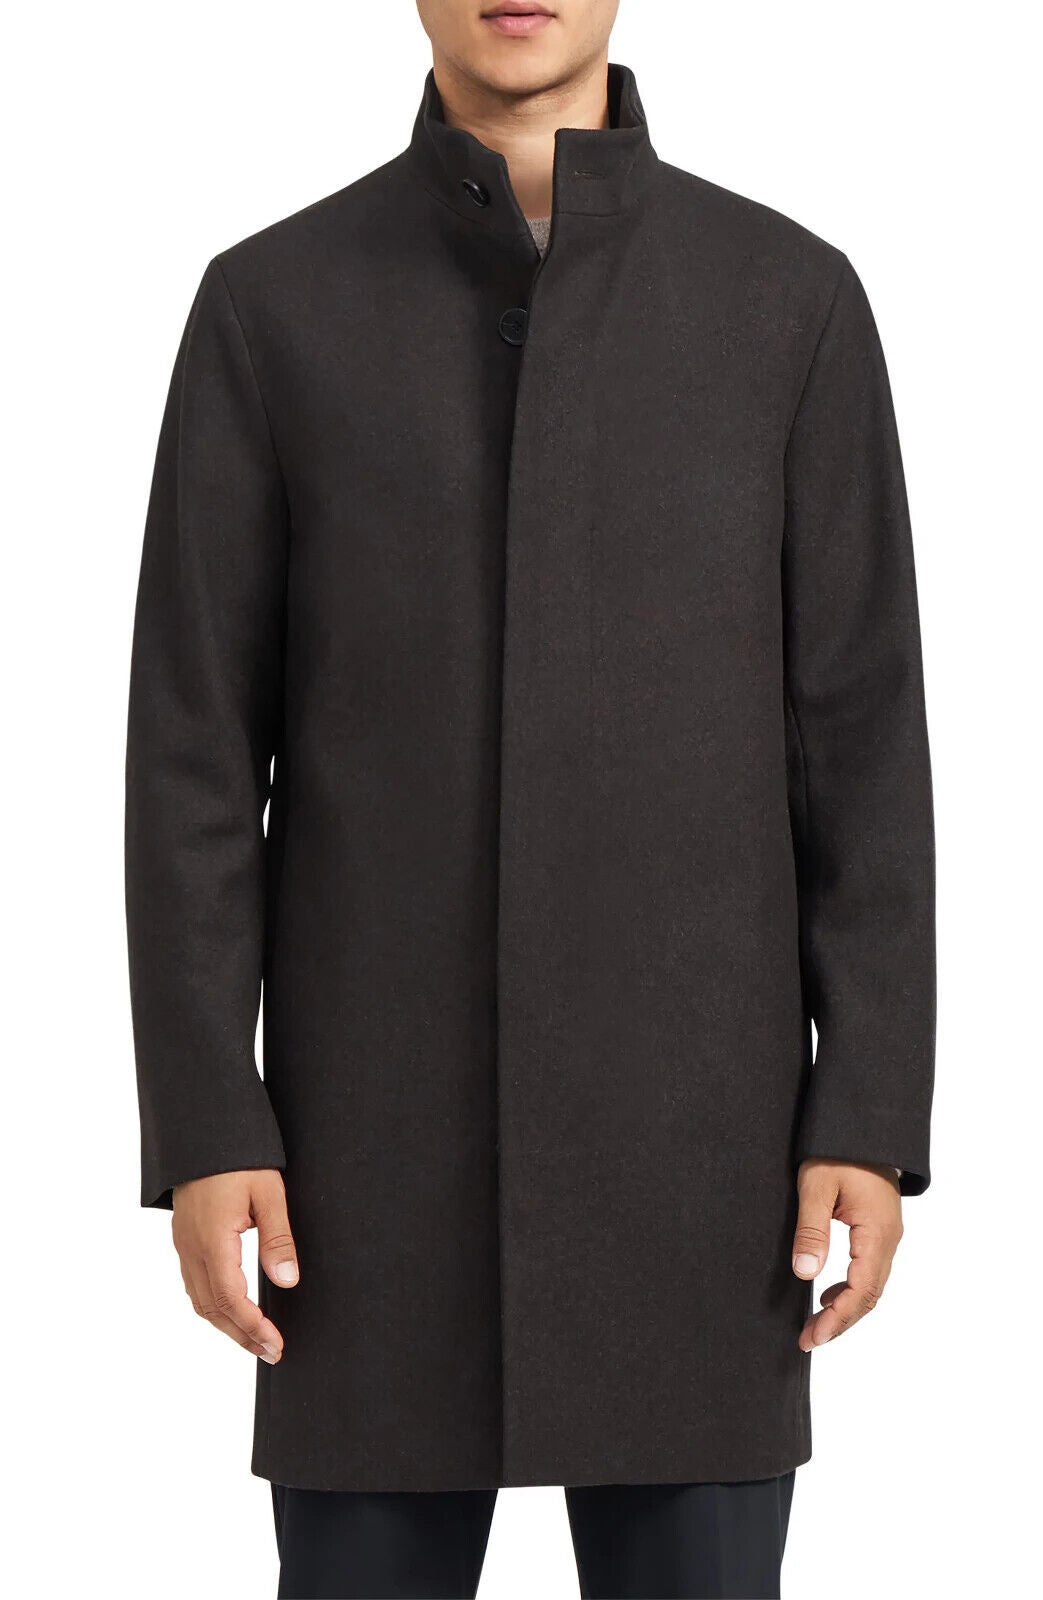 Theory Belvin Wool Topcoat MSRP $695 Size M # 20A 665 NEW